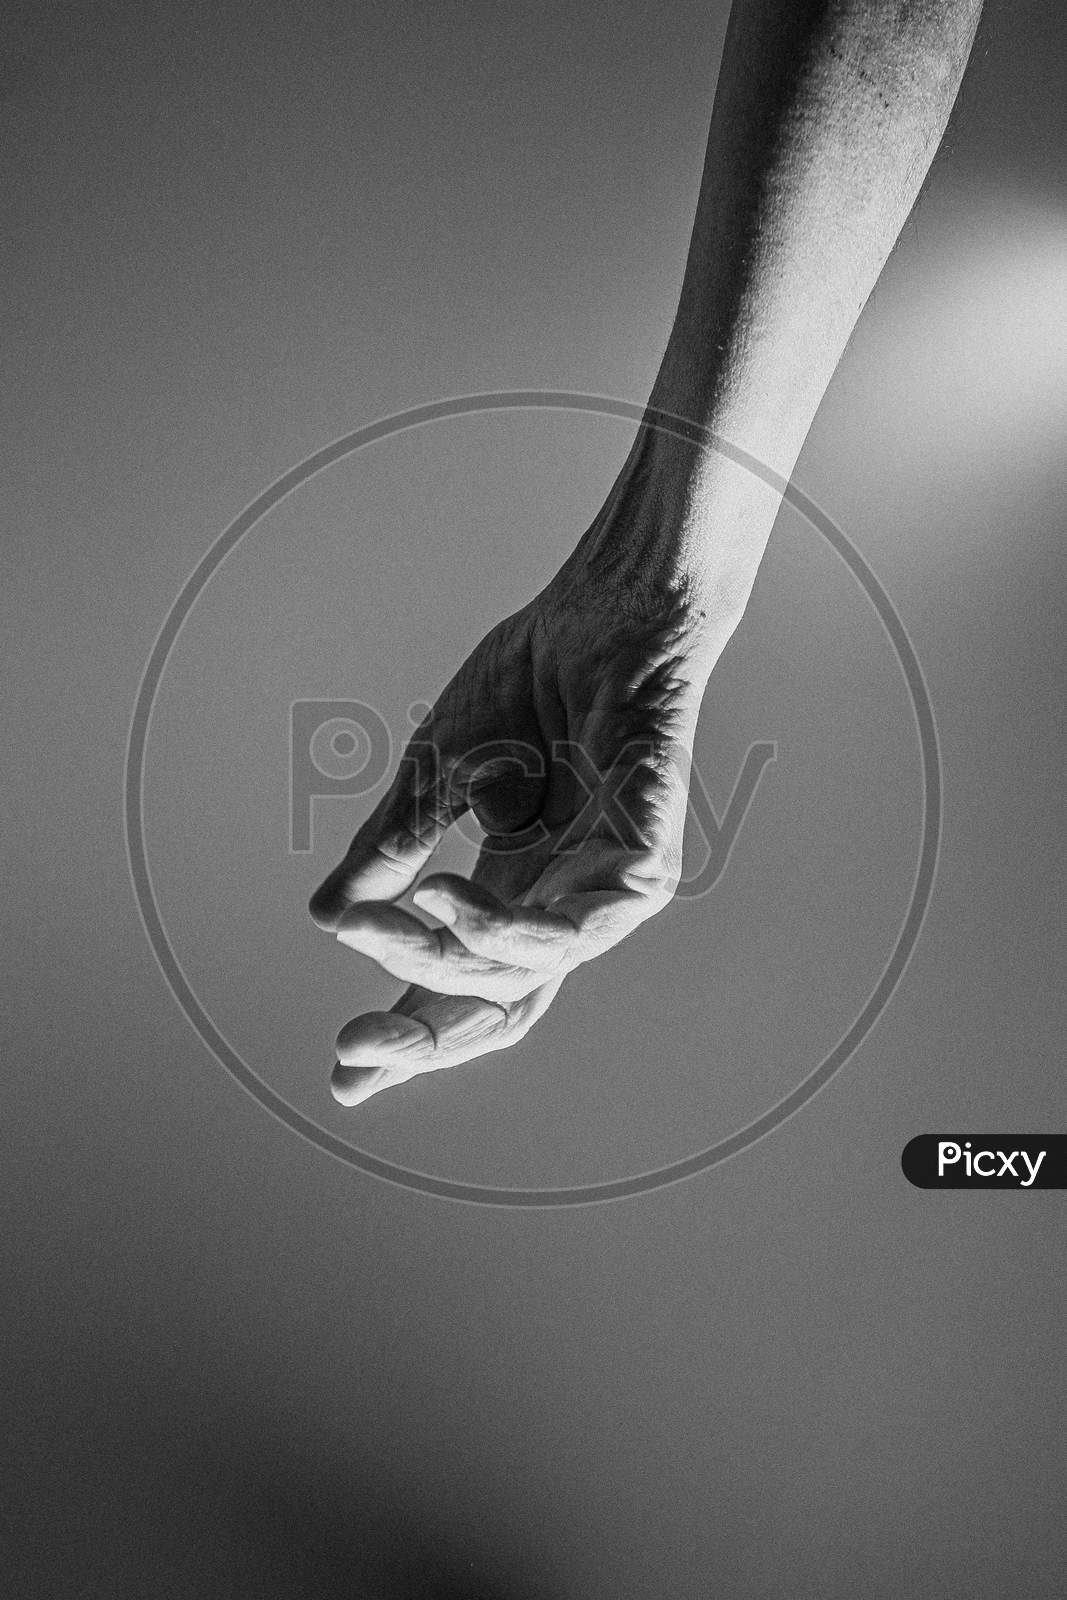 Old Hand Hangs From The Top Of The Image In Black And White